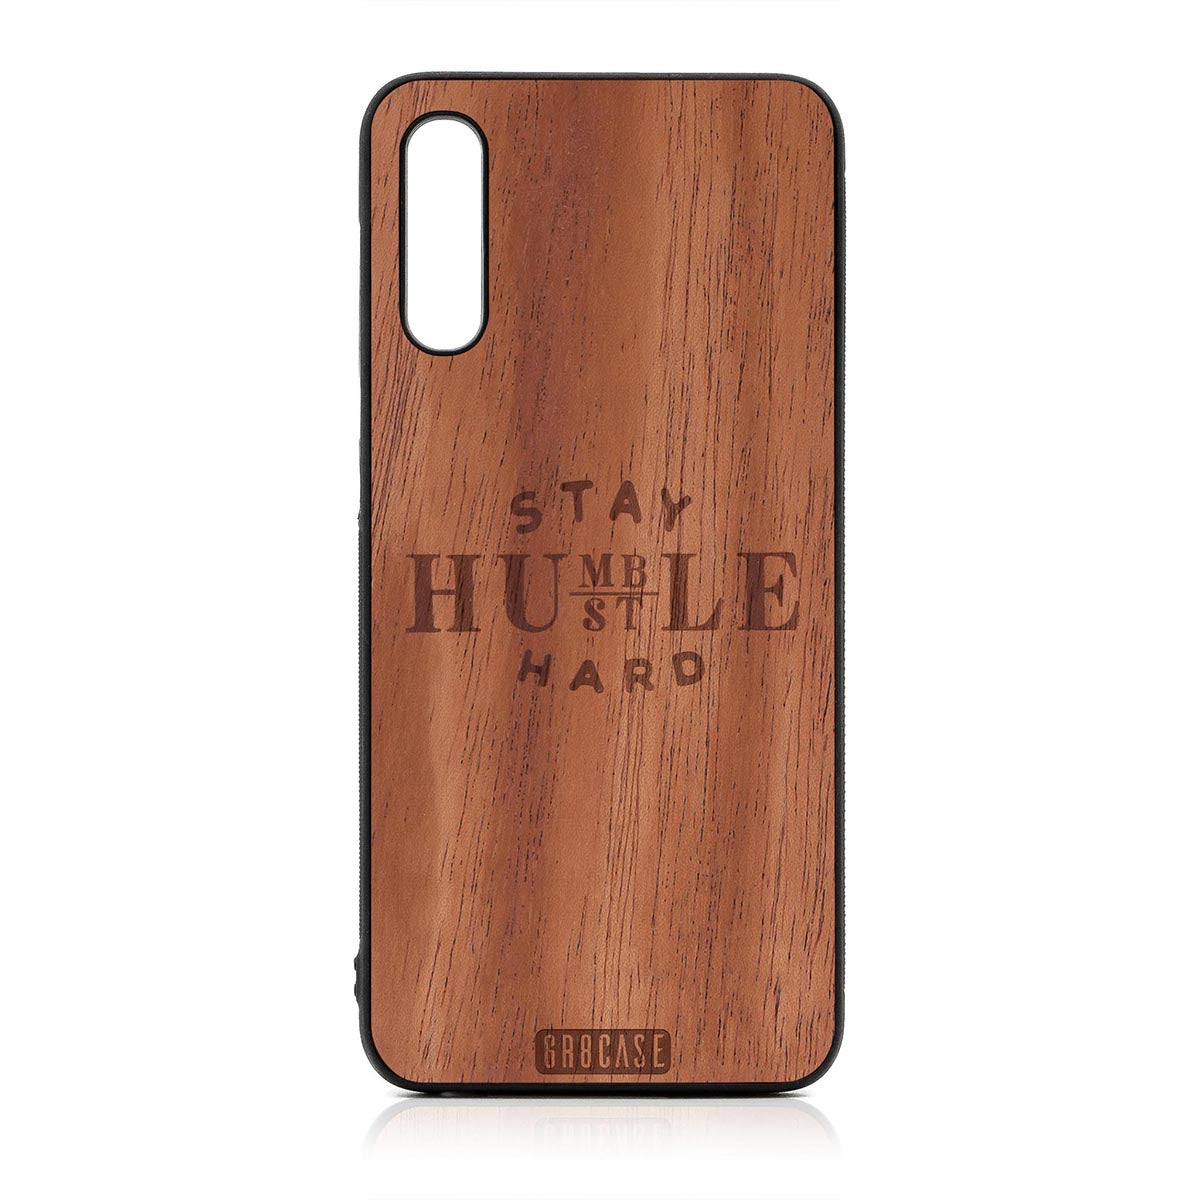 Stay Humble Hustle Hard Design Wood Case For Samsung Galaxy A50 by GR8CASE